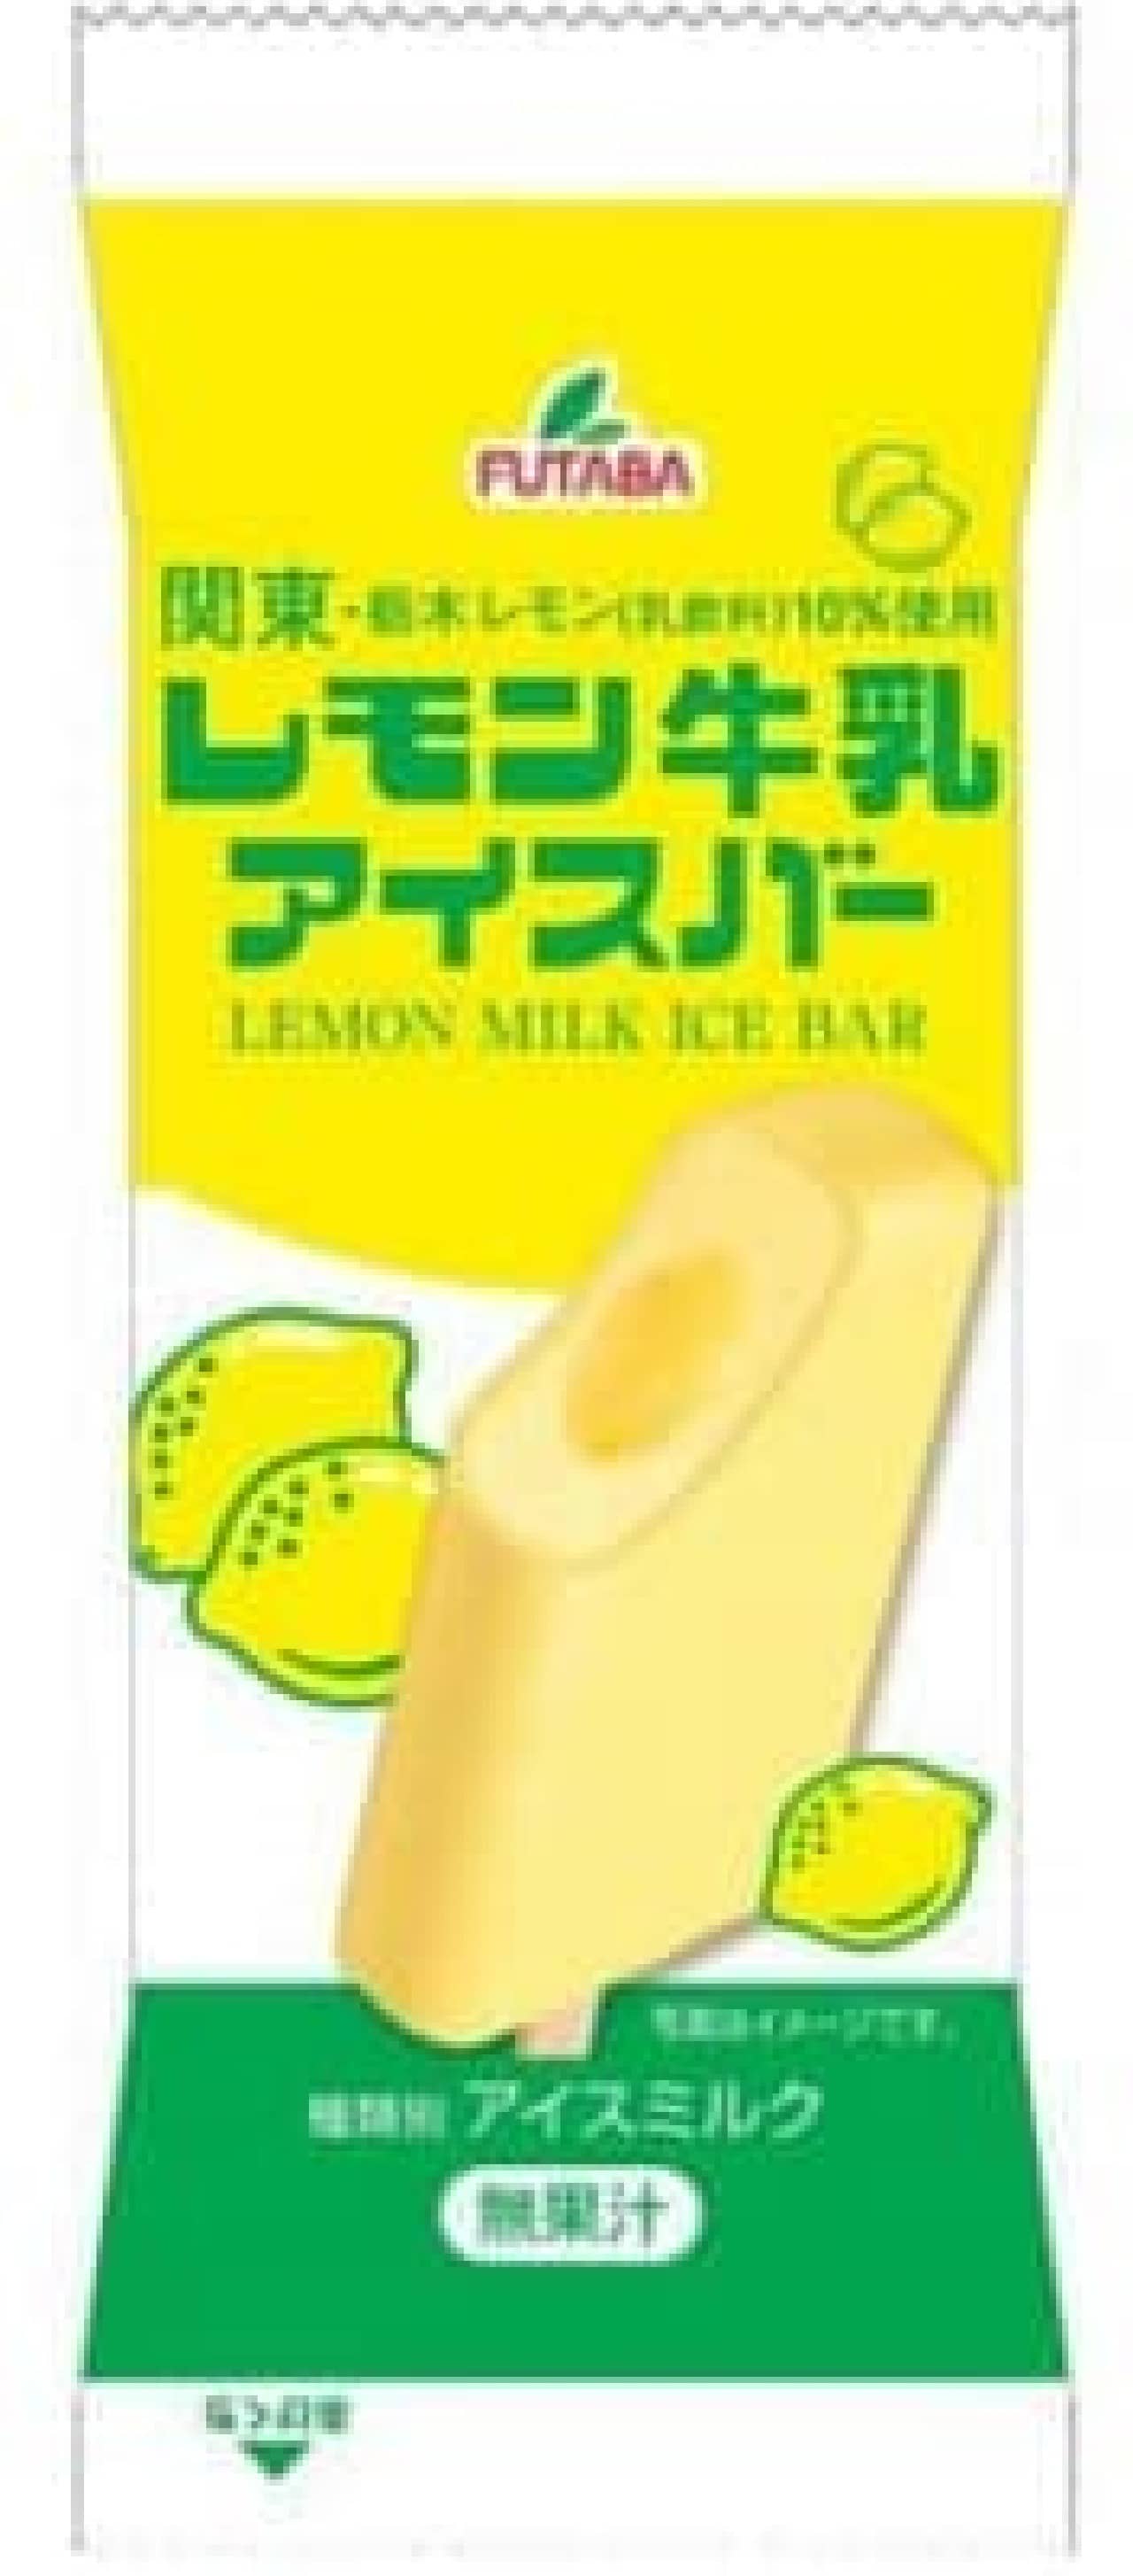 For those who like lemon milk and those who are new to it